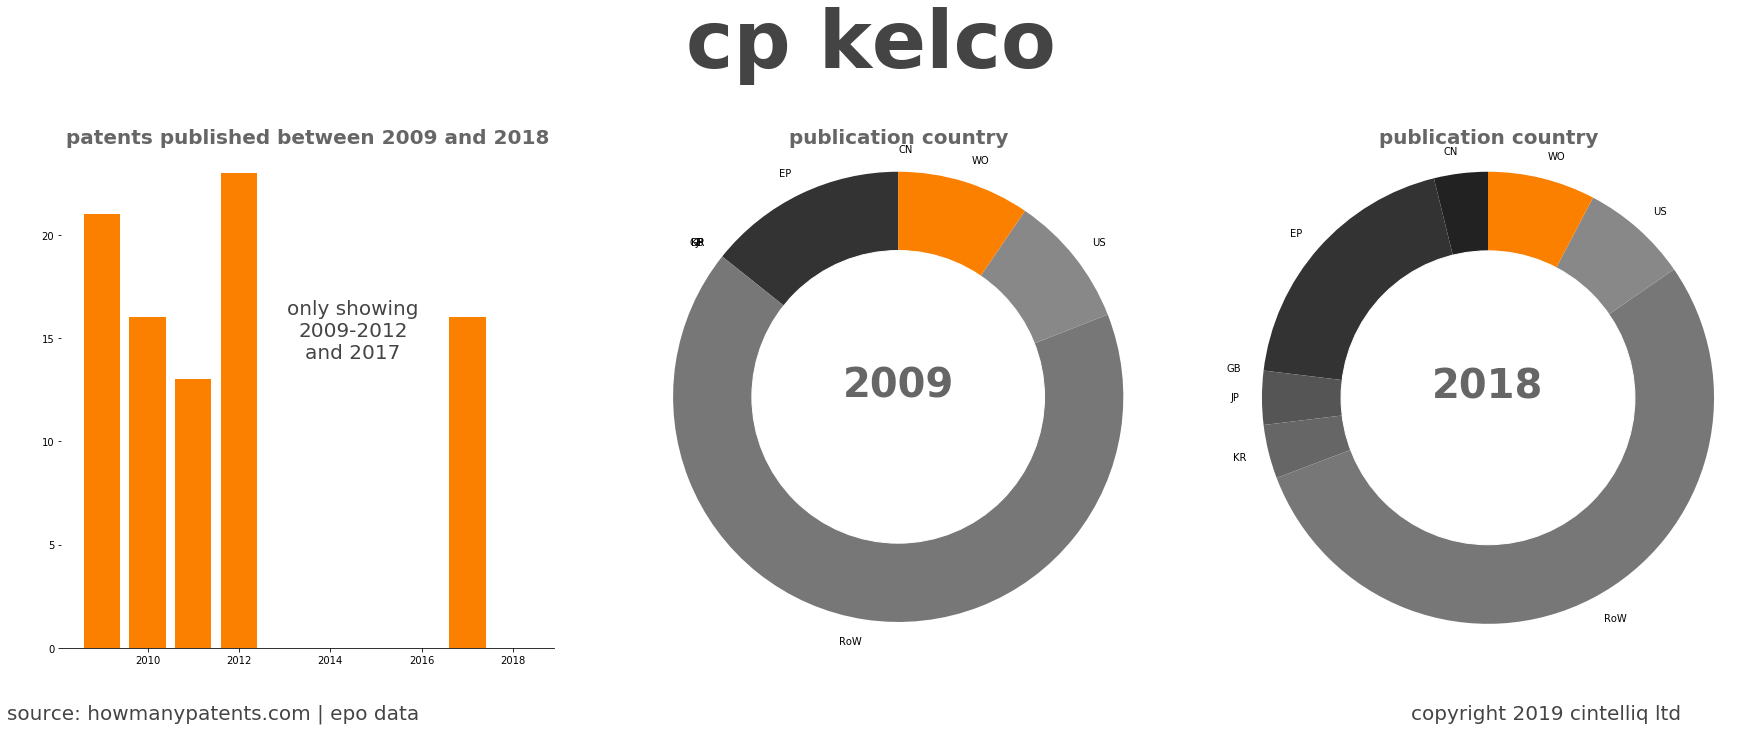 summary of patents for Cp Kelco